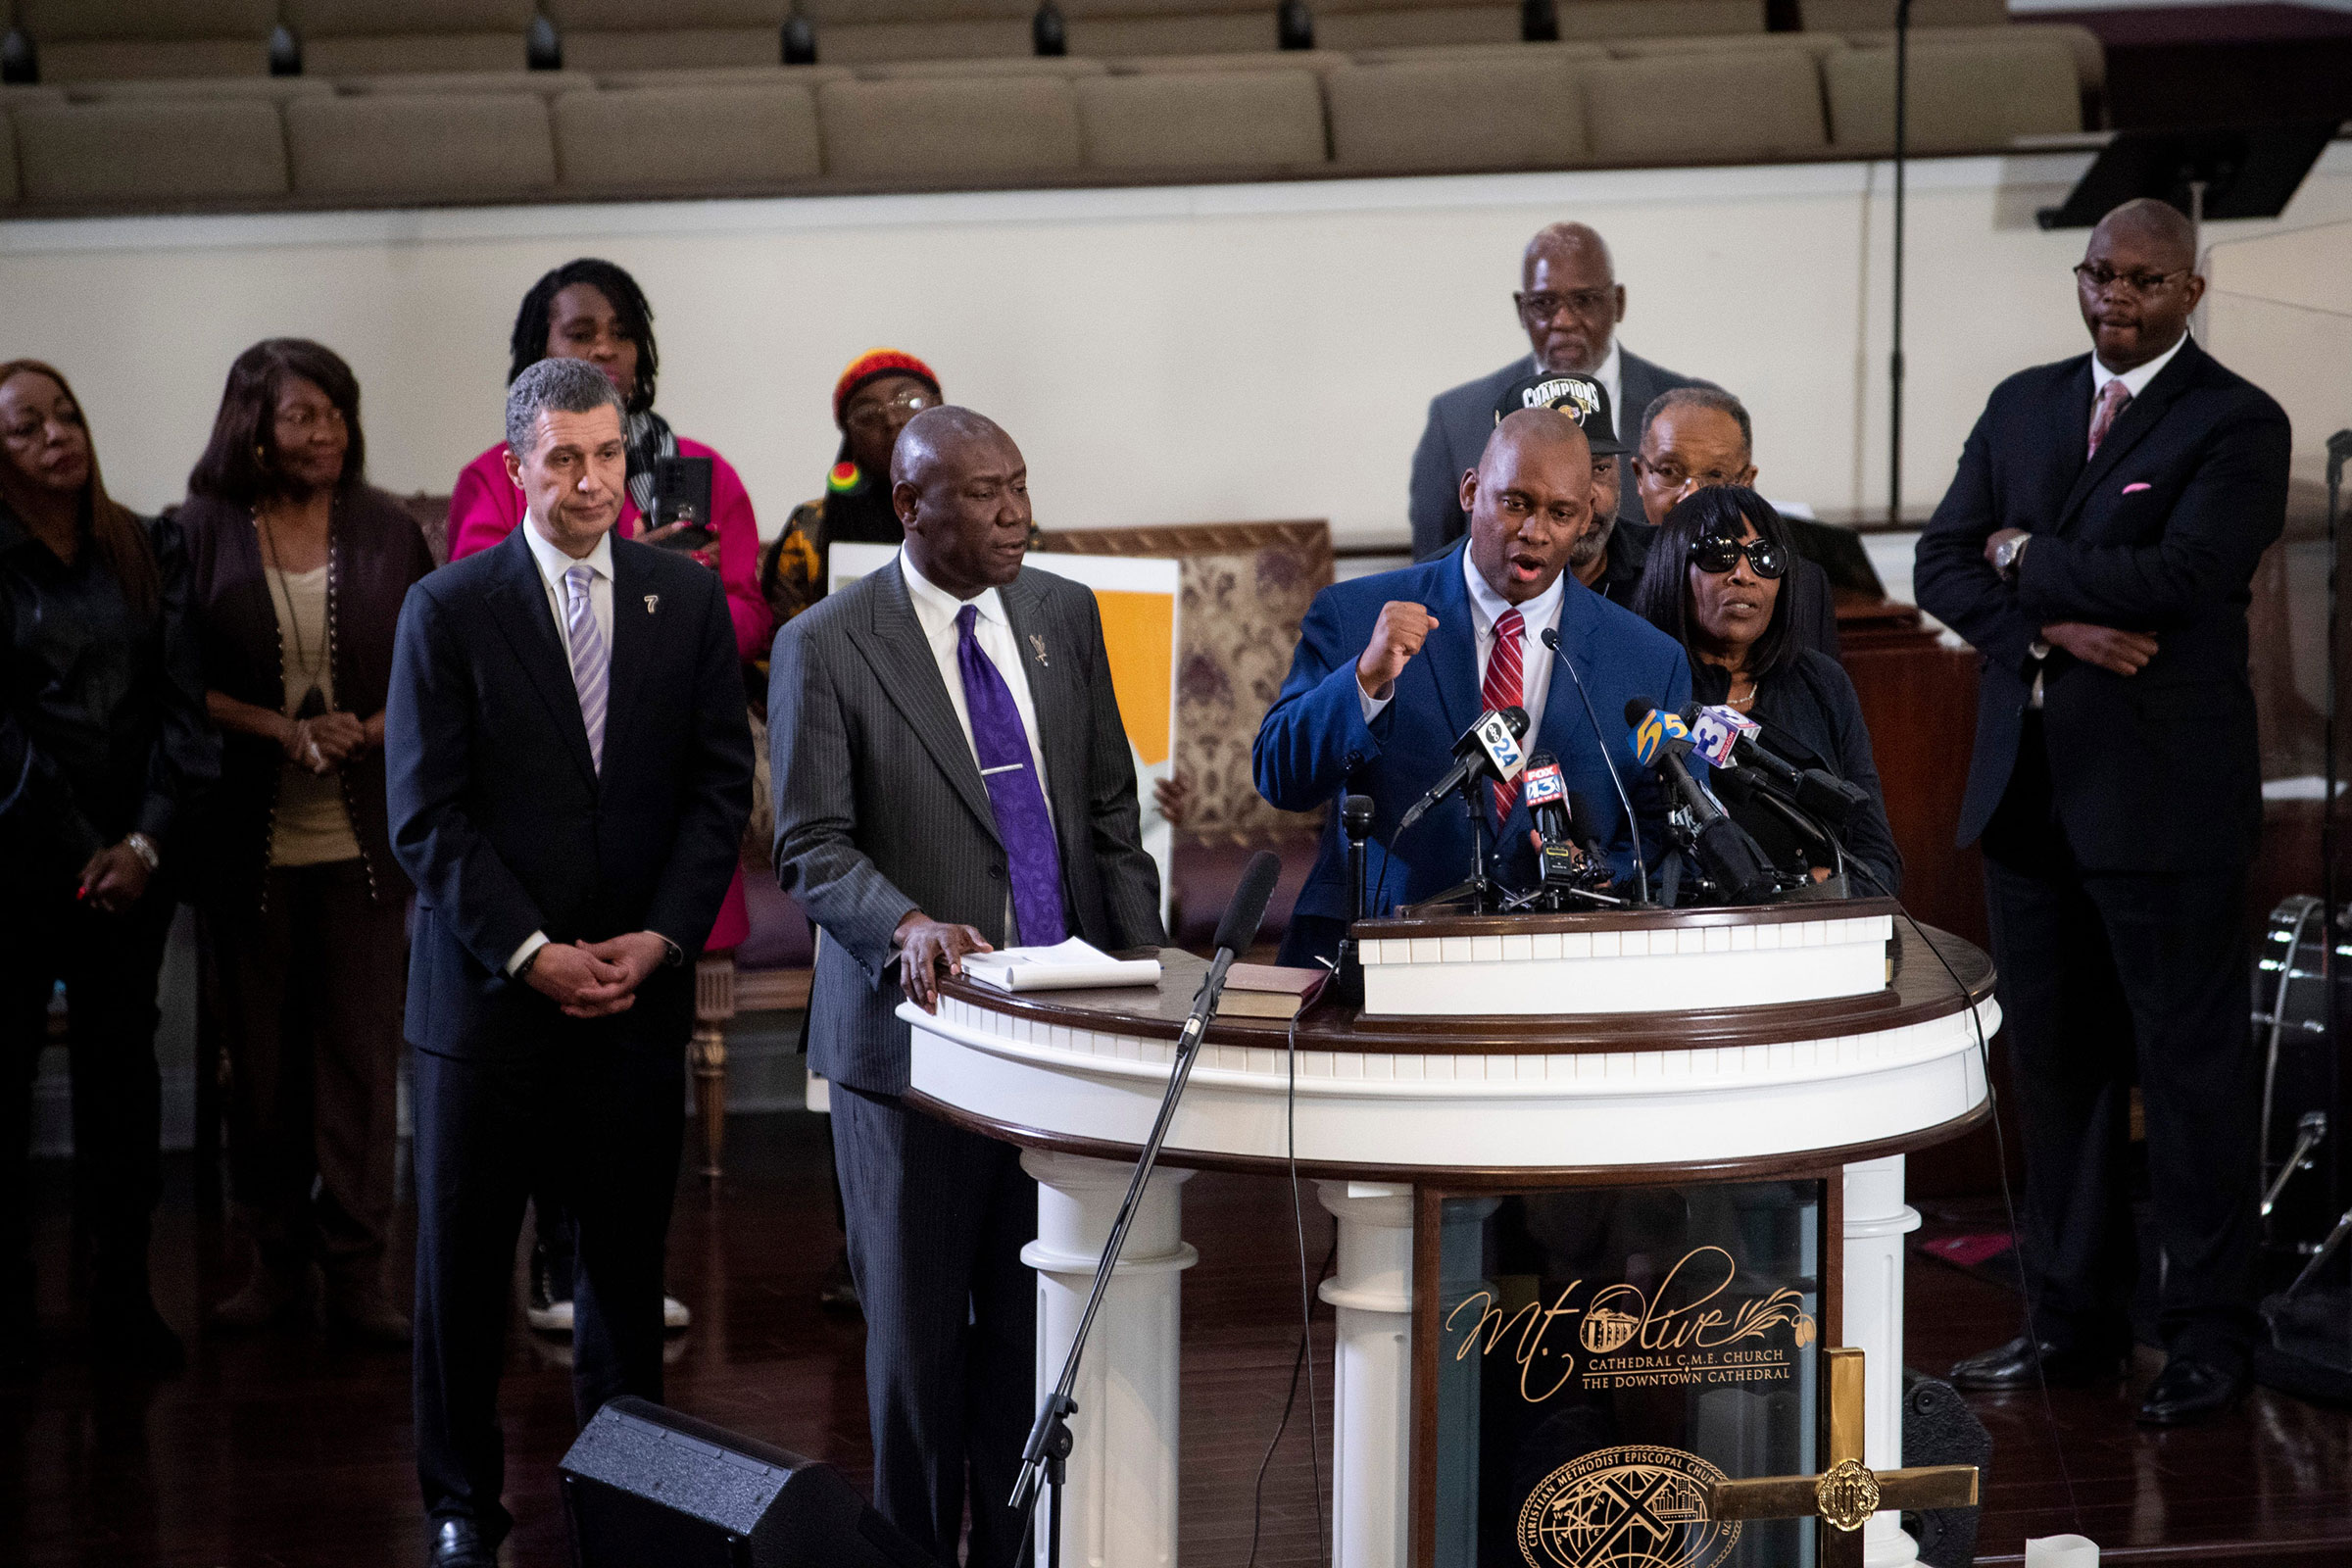 Van Turner, the president of the Memphis branch of NAACP, members of Tyre Nichols' family, and lawyers representing the family attend a press conference at Mt. Olive Cathedral CME Church in Memphis, Tenn., on Jan. 23, 2023. (Chris Day—The Commercial Appeal/ USA TODAY/Reuters)